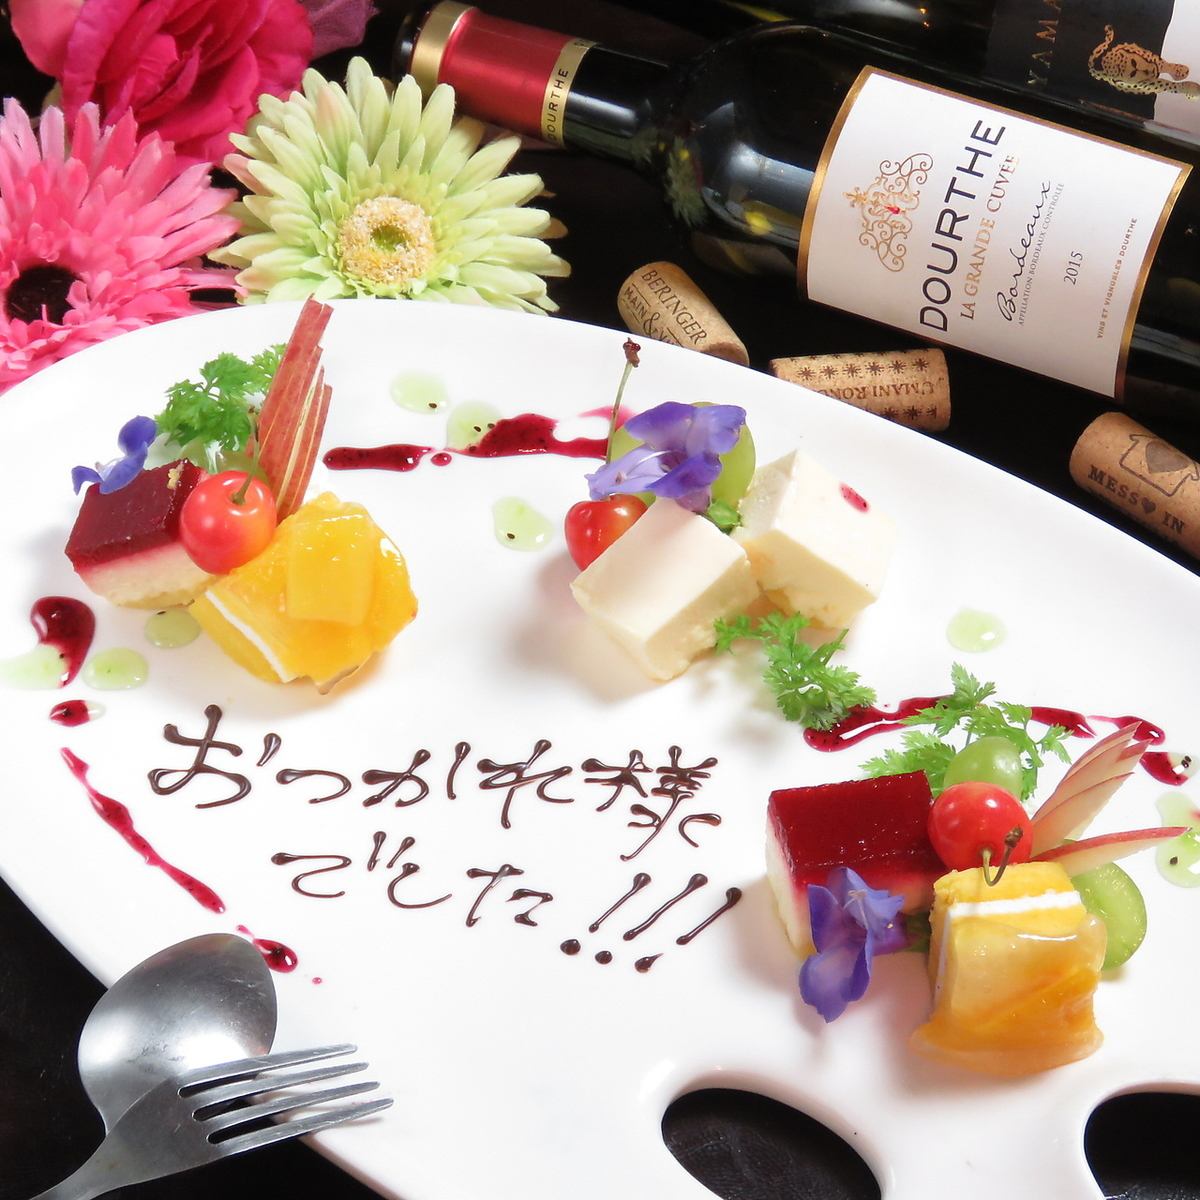 A special dessert plate will be presented on your birthday ♪